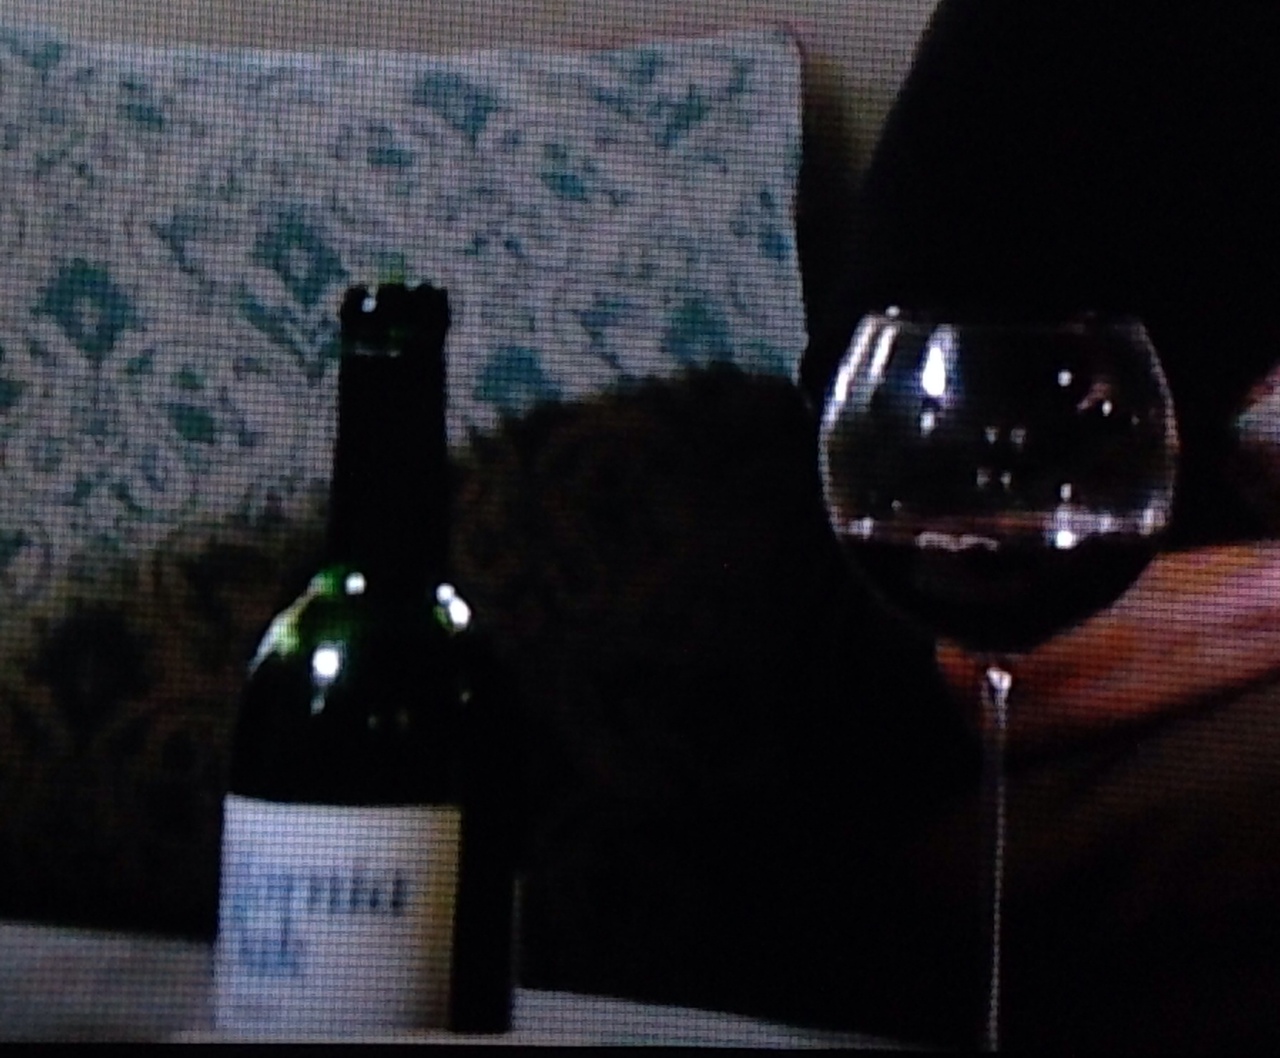 Olivia Pope Wine Glasses - As Seen in Scandal